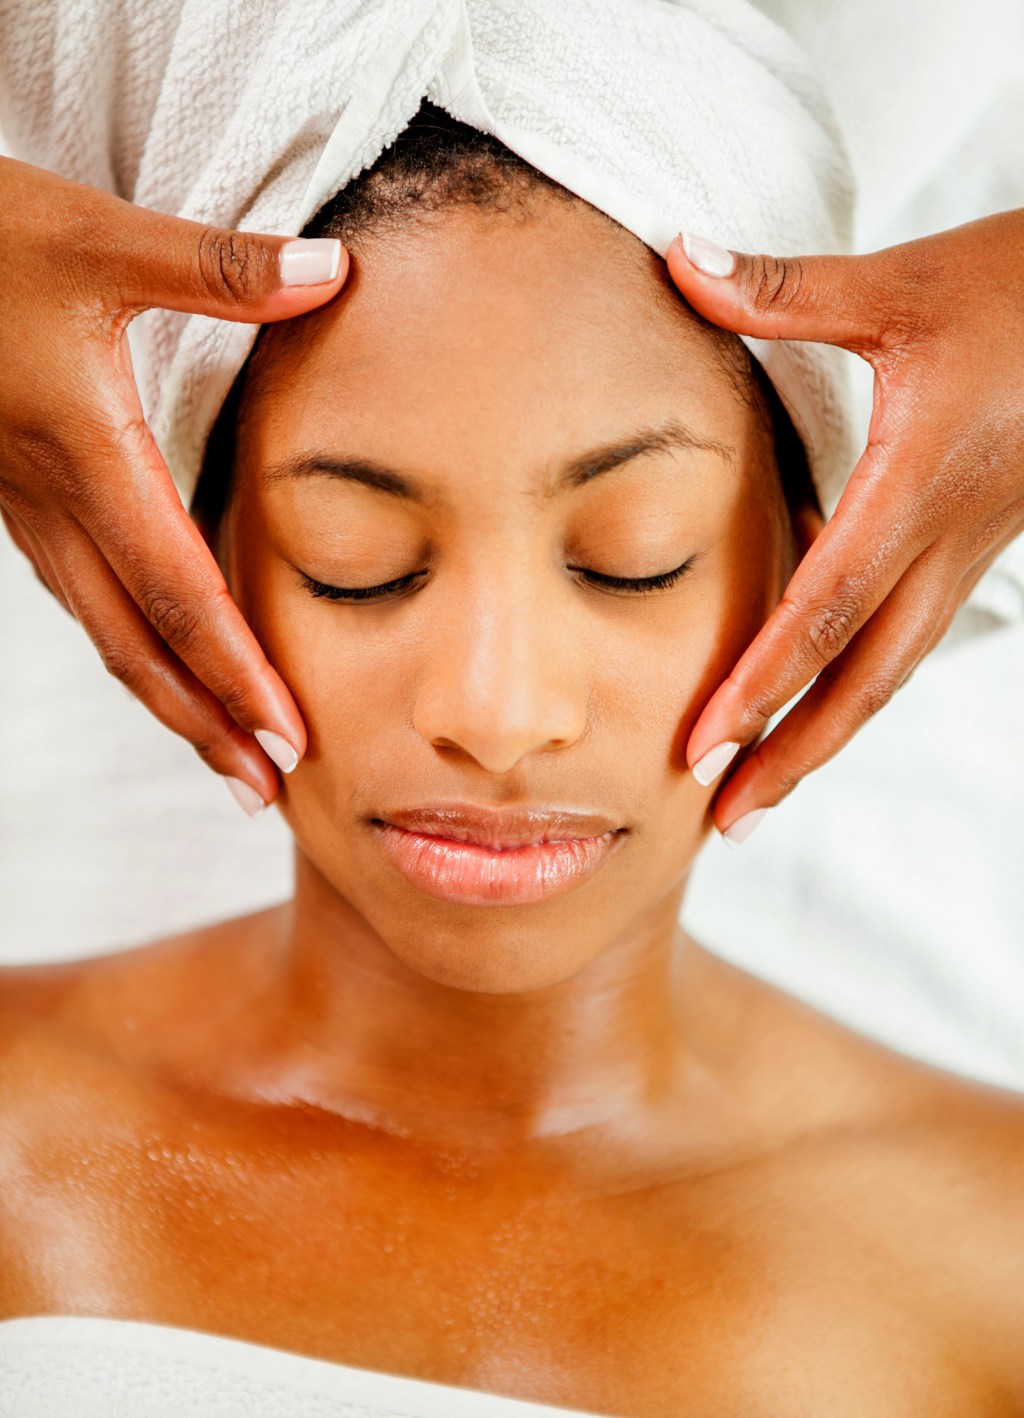 Beautiful black young woman getting a face massage looking very relaxed